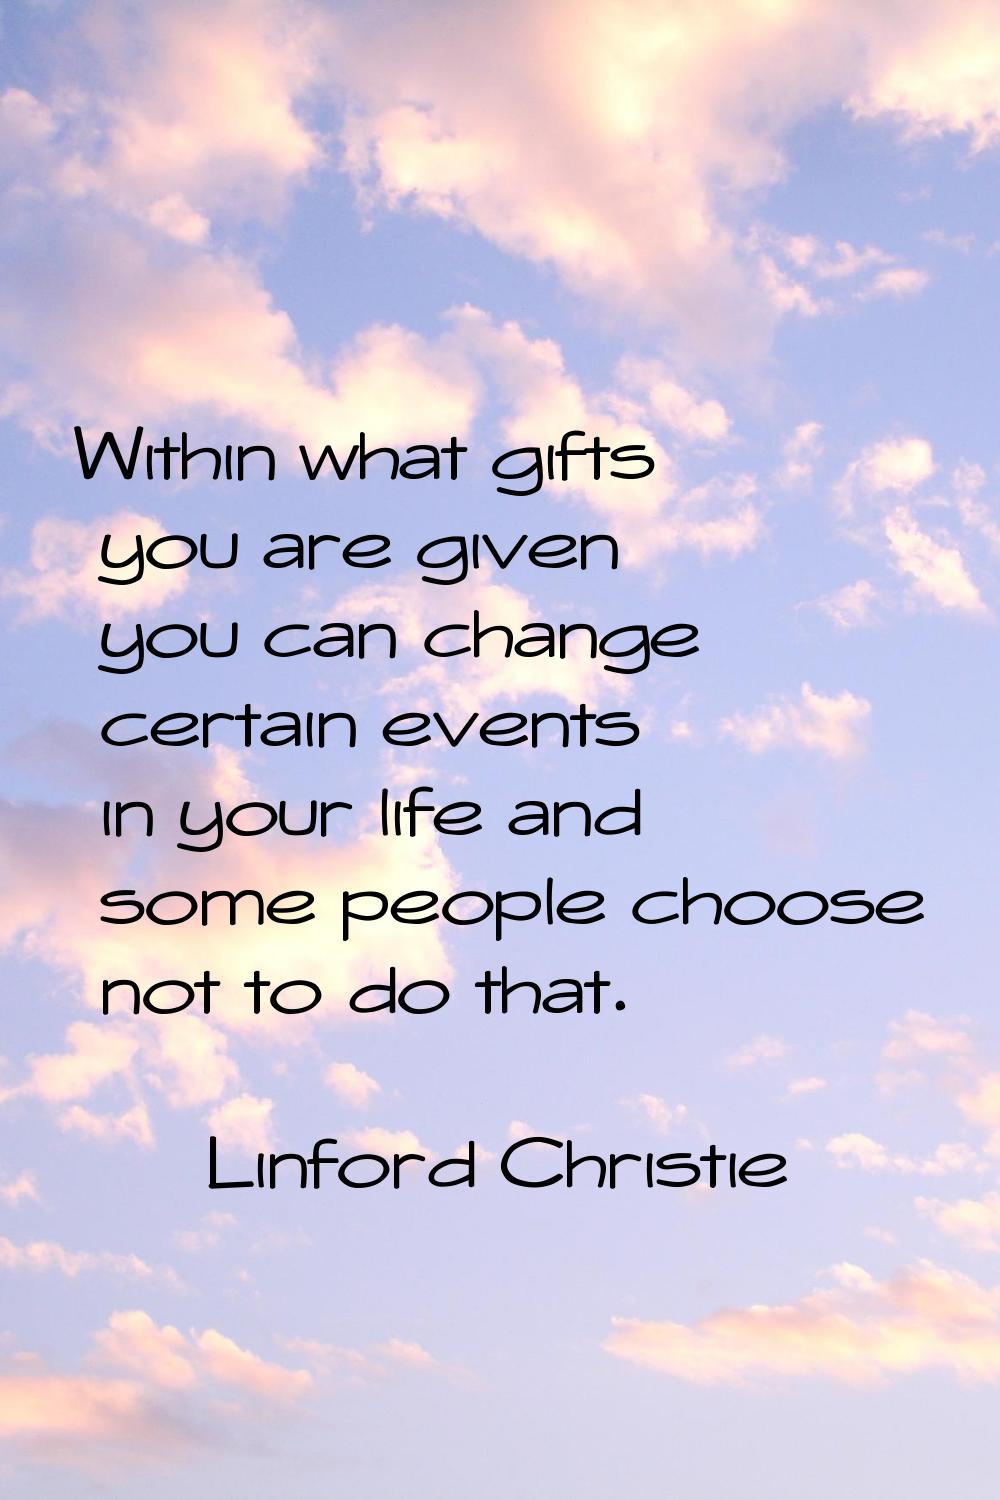 Within what gifts you are given you can change certain events in your life and some people choose n